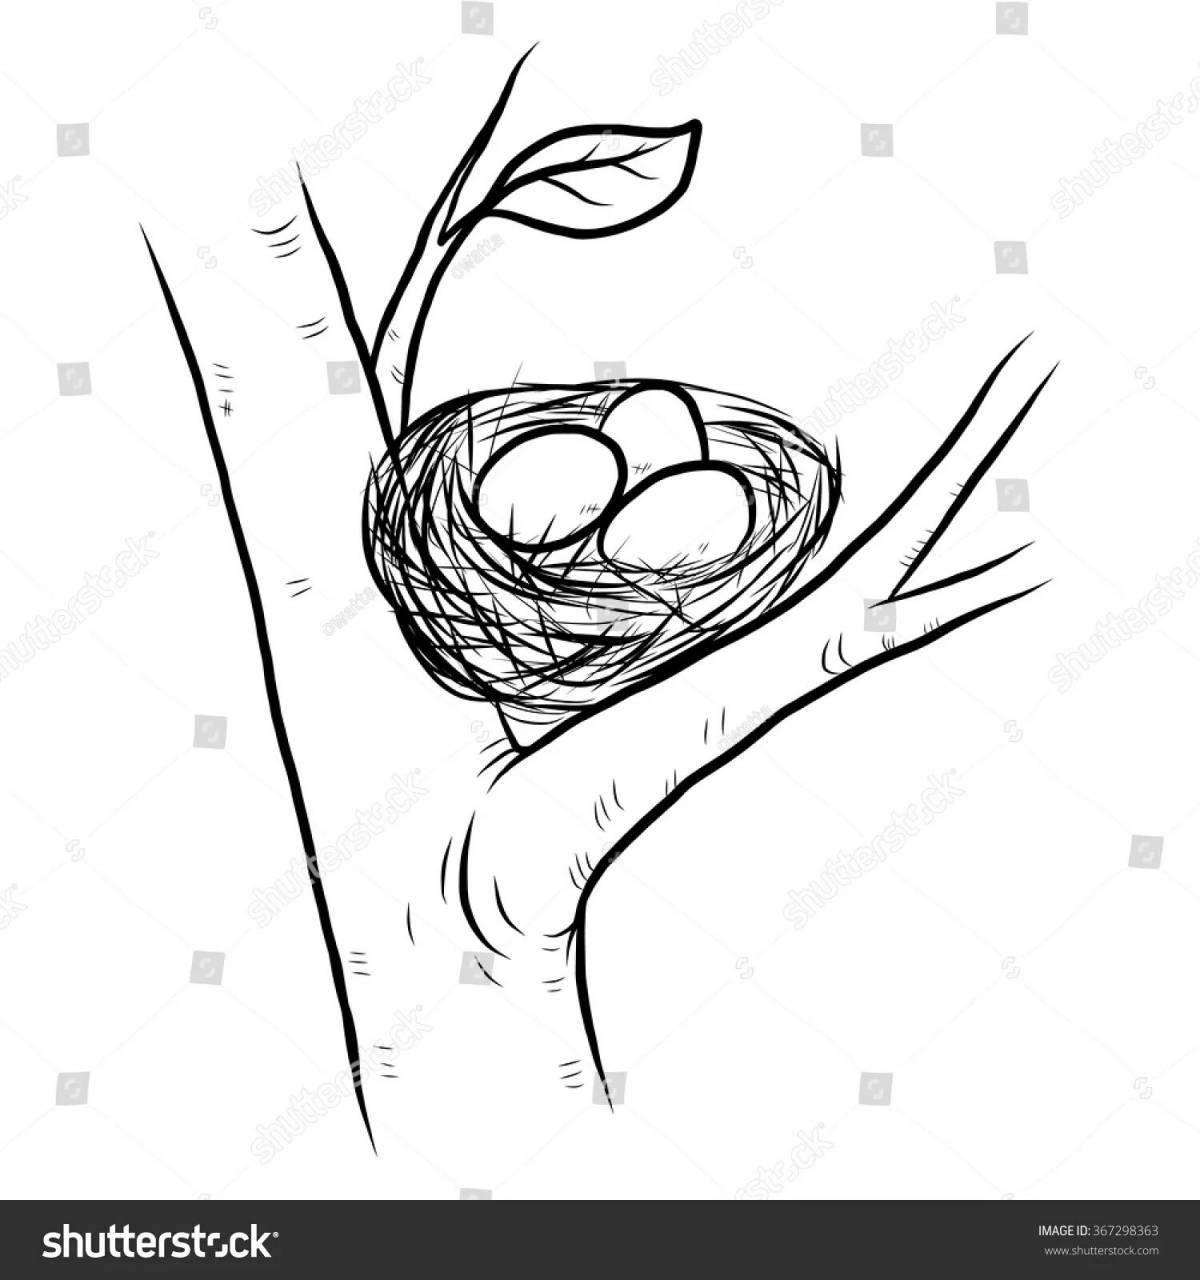 Coloring page of baby nest